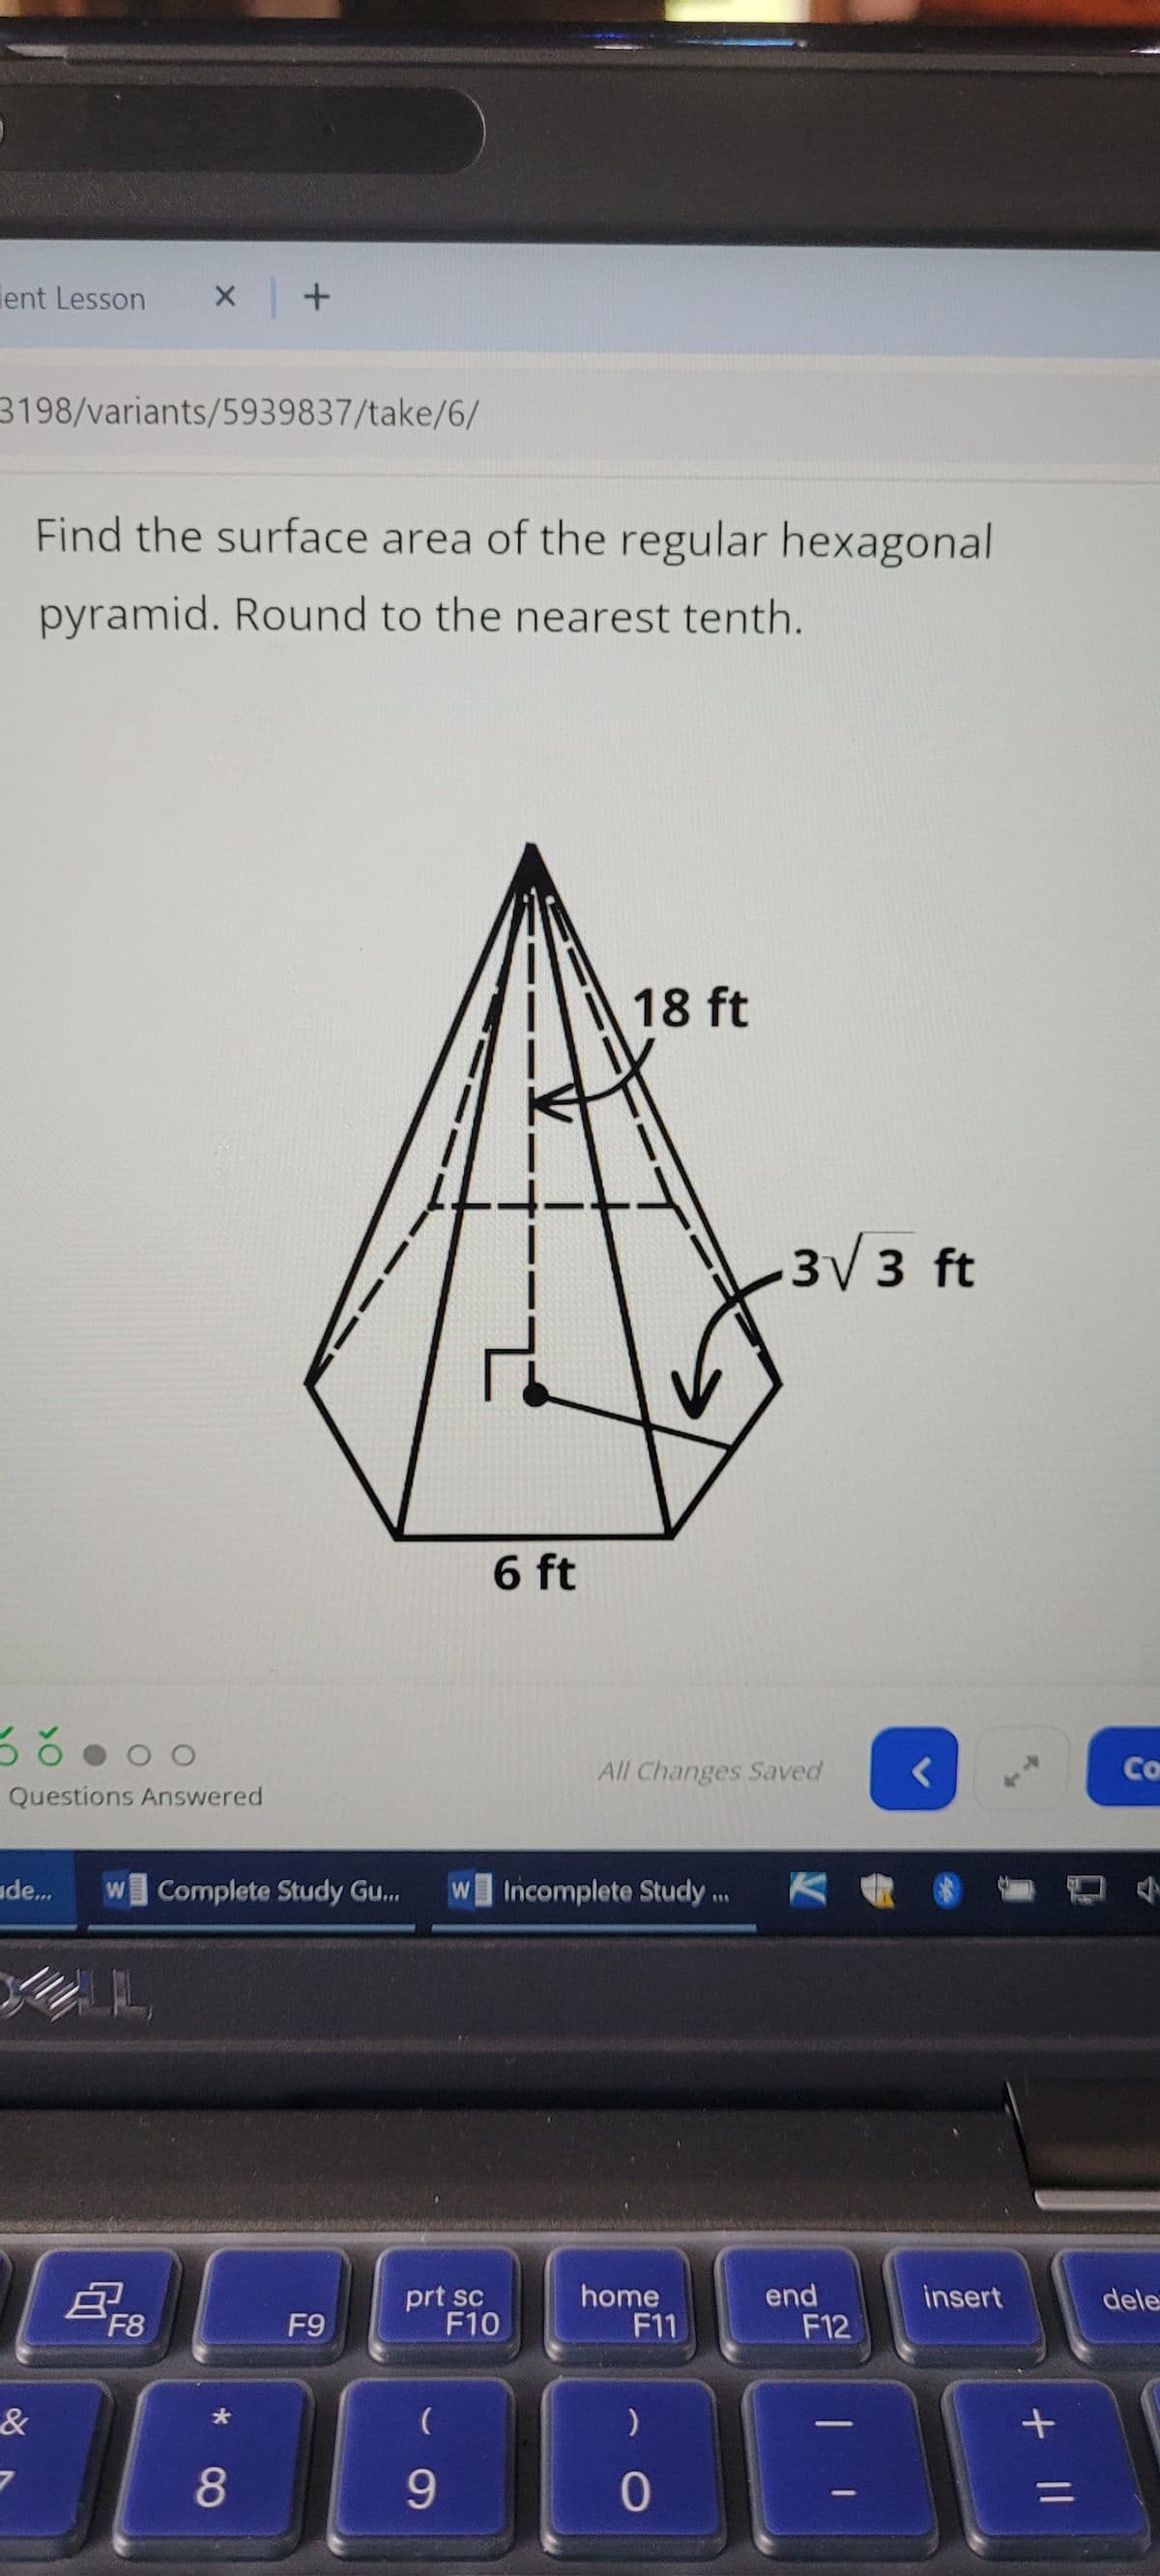 lent Lesson
x +
3198/variants/5939837/take/6/
Find the surface area of the regular hexagonal
pyramid. Round to the nearest tenth.
DO
Questions Answered
18 ft
6 ft
3√3 ft
All Changes Saved
Co
de...
W Complete Study Gu...
W Incomplete Study.
&
B
F8
F9
69
*8
prt sc
F10
home
F11
end
insert
dele
F12
(
)
9
0
=
+ ||